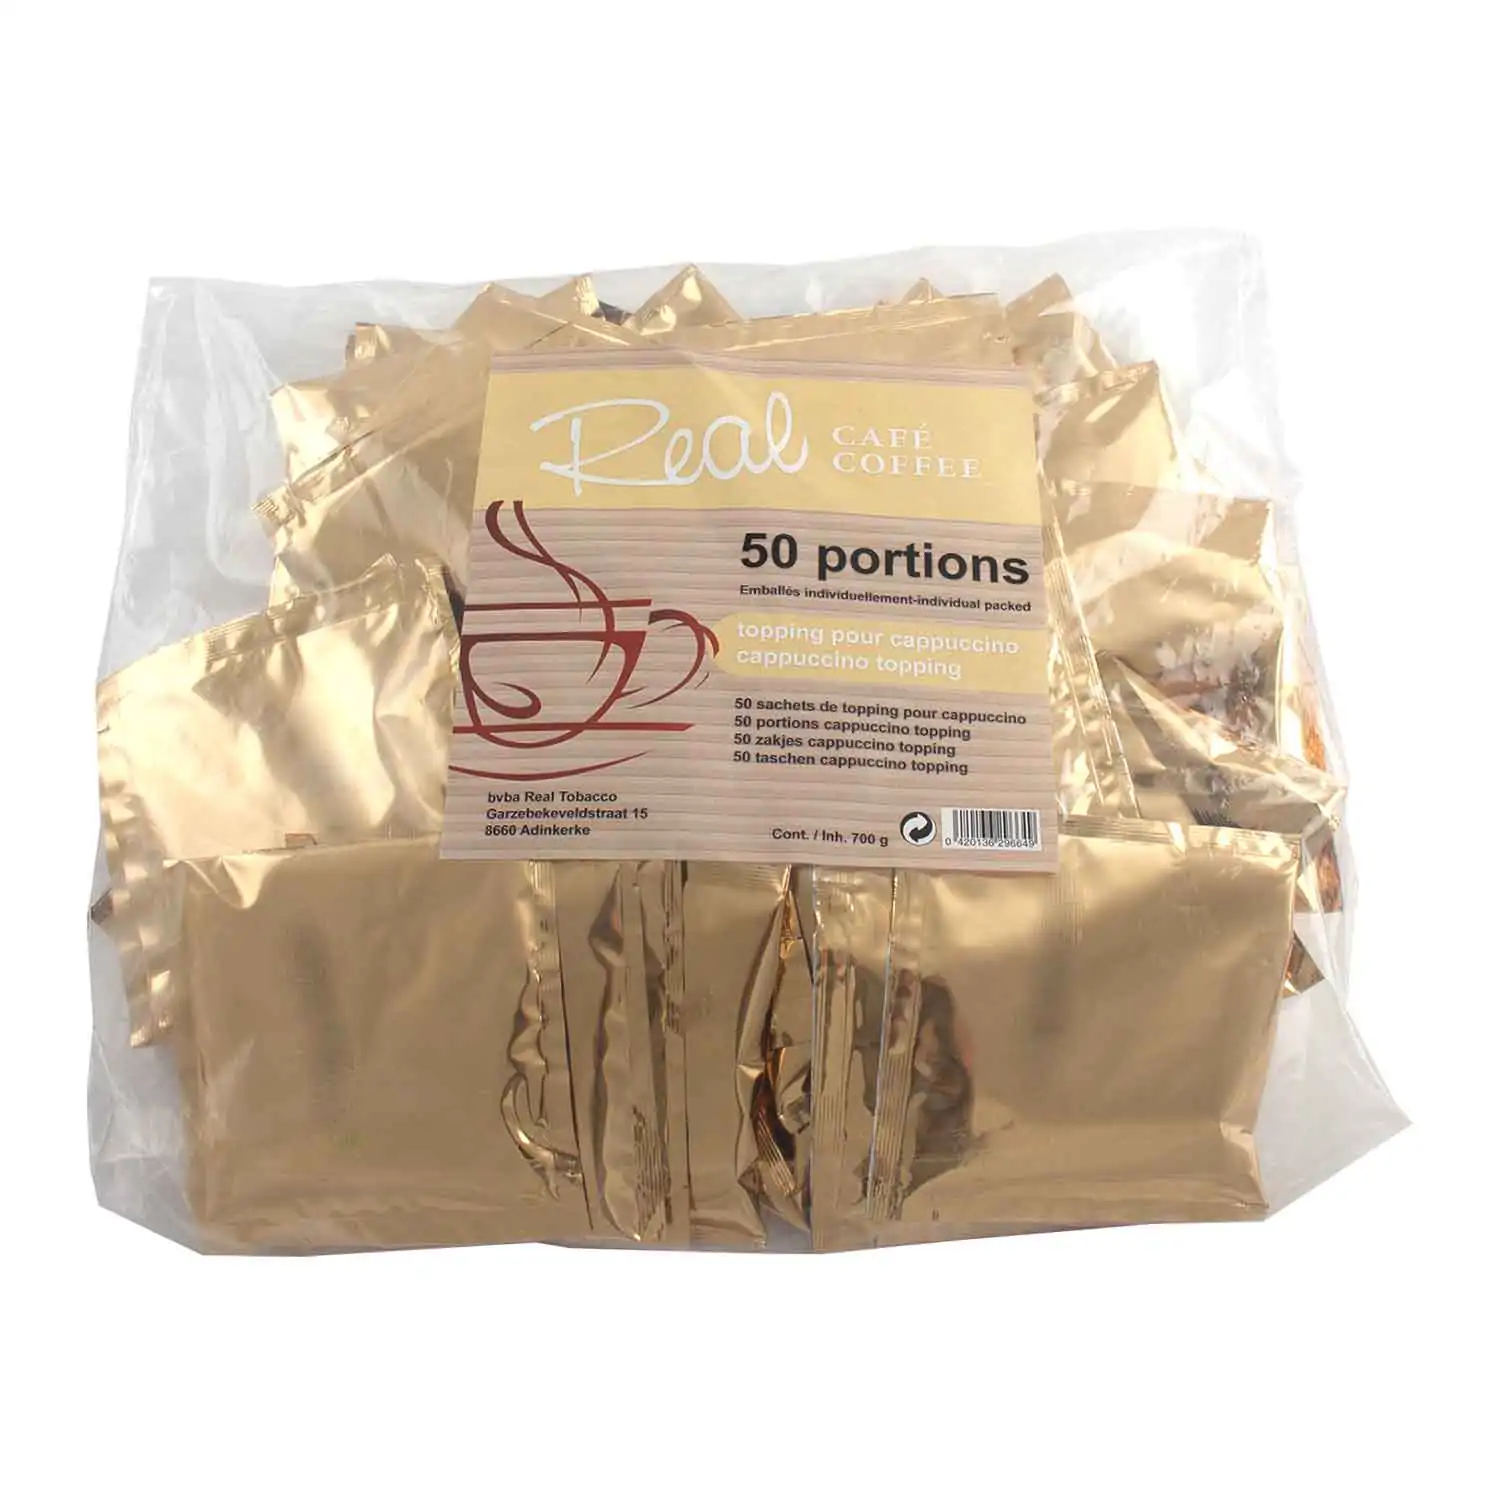 Real coffee topping cappuccino 50pcs - Buy at Real Tobacco